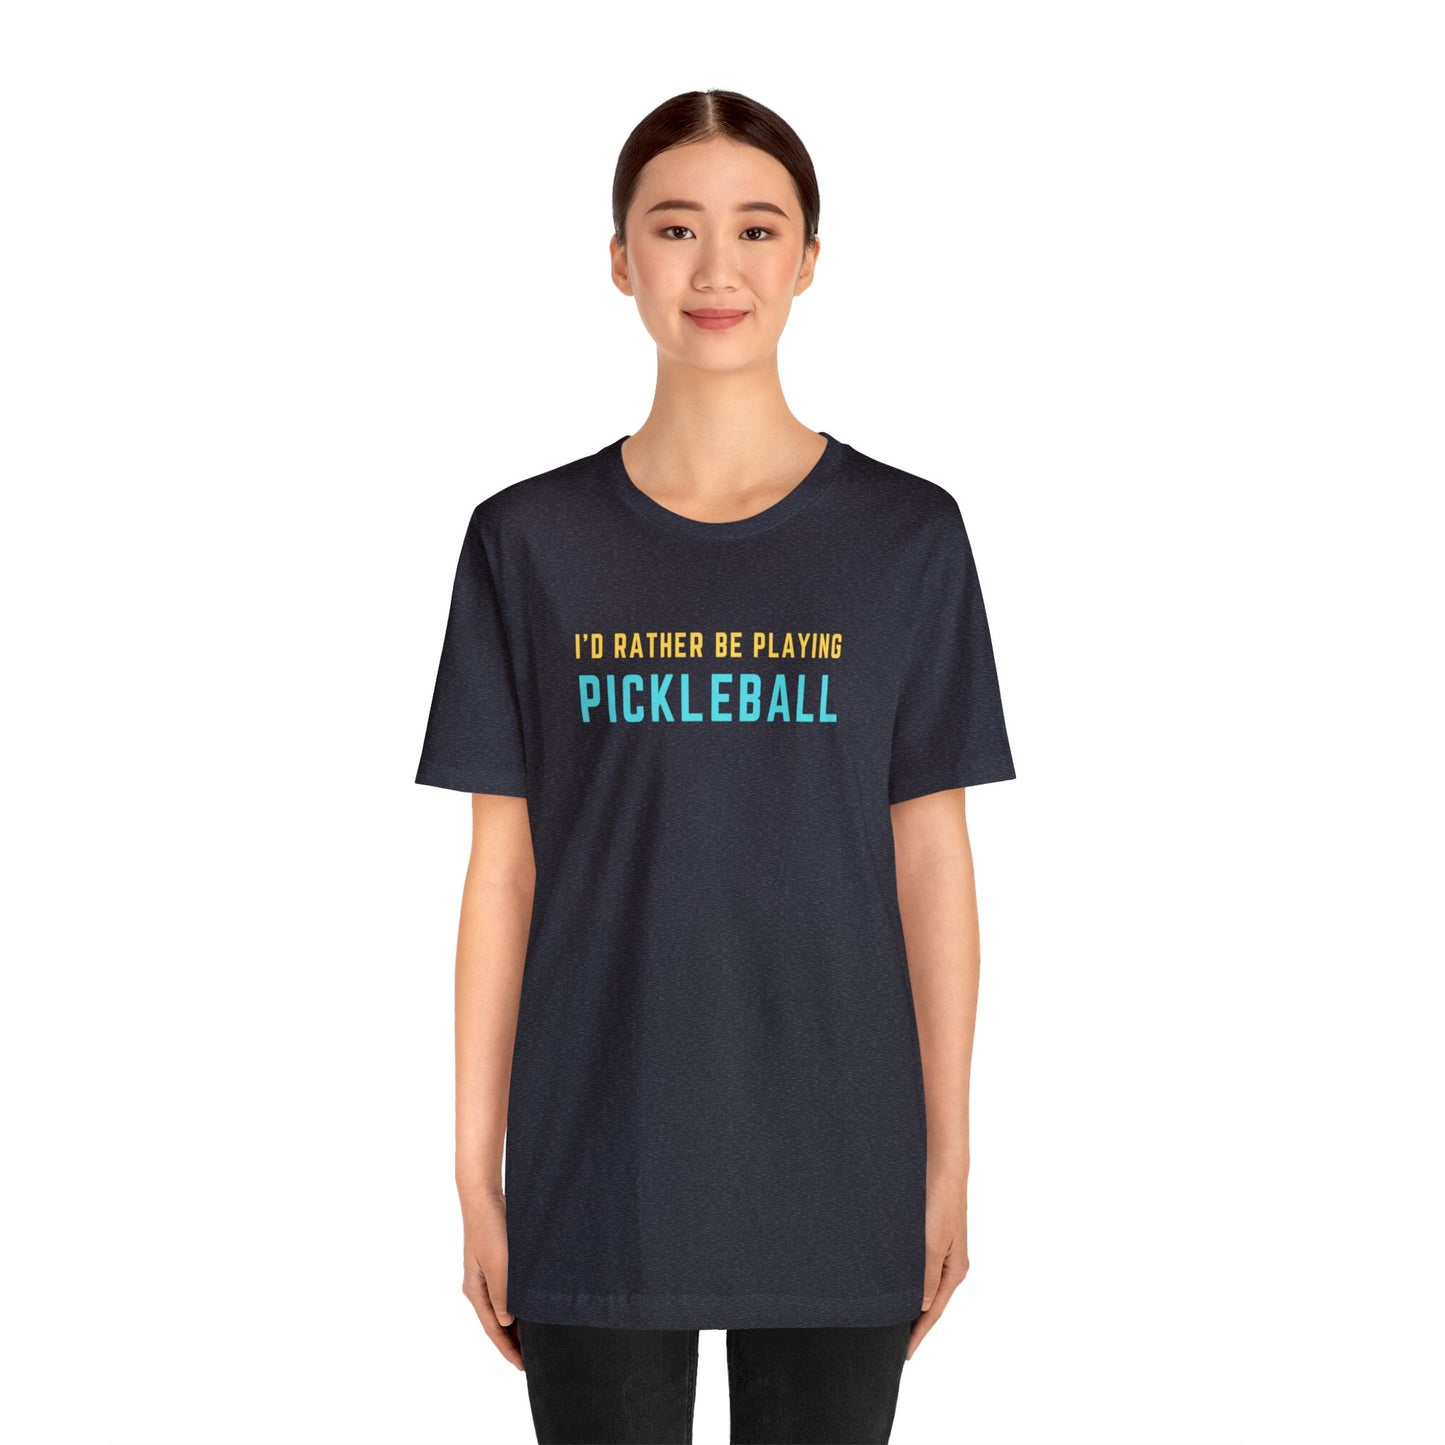 I'd Rather Be Playing Pickleball Unisex Tee